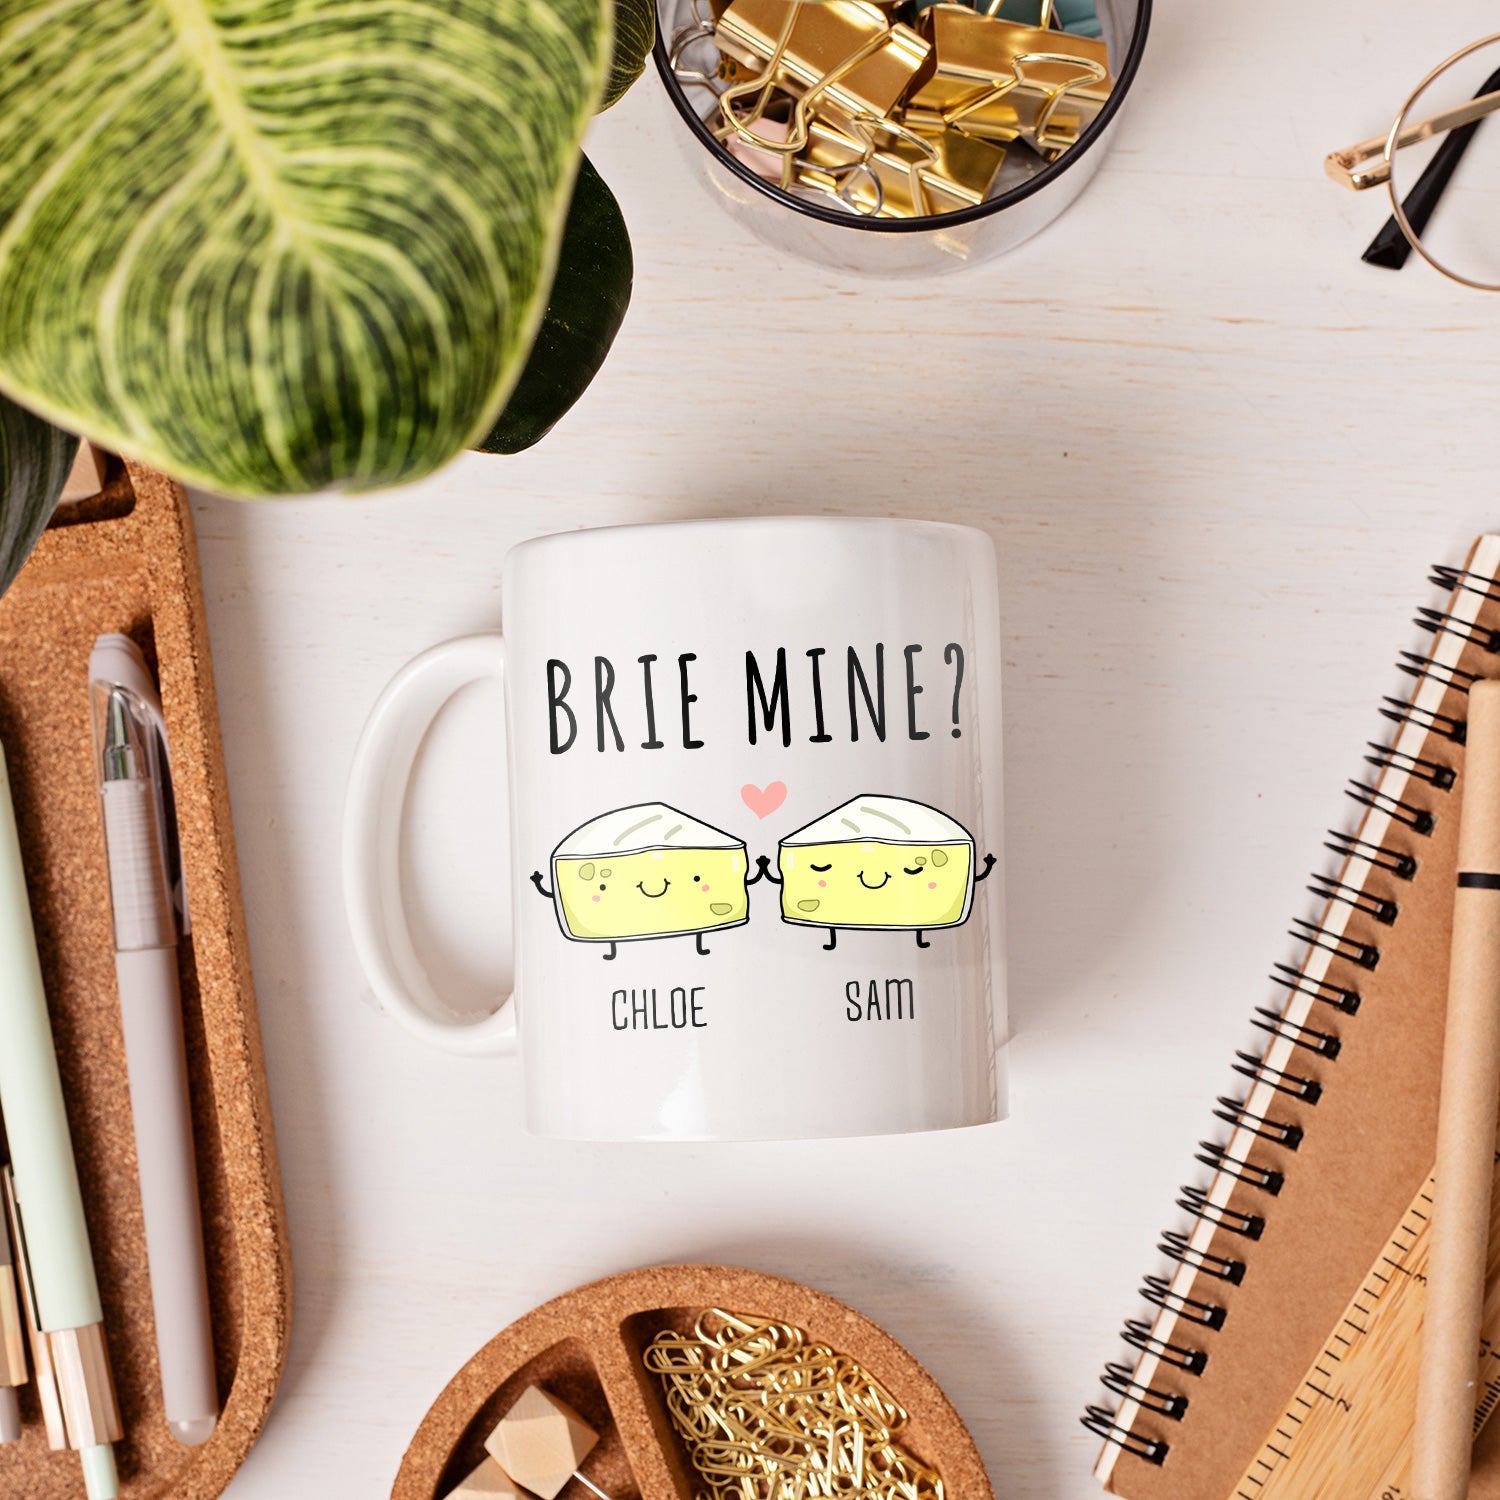 Brie Mine? - Personalized Anniversary, Valentine's Day, Birthday or Christmas gift For Him or Her - Custom Mug - MyMindfulGifts